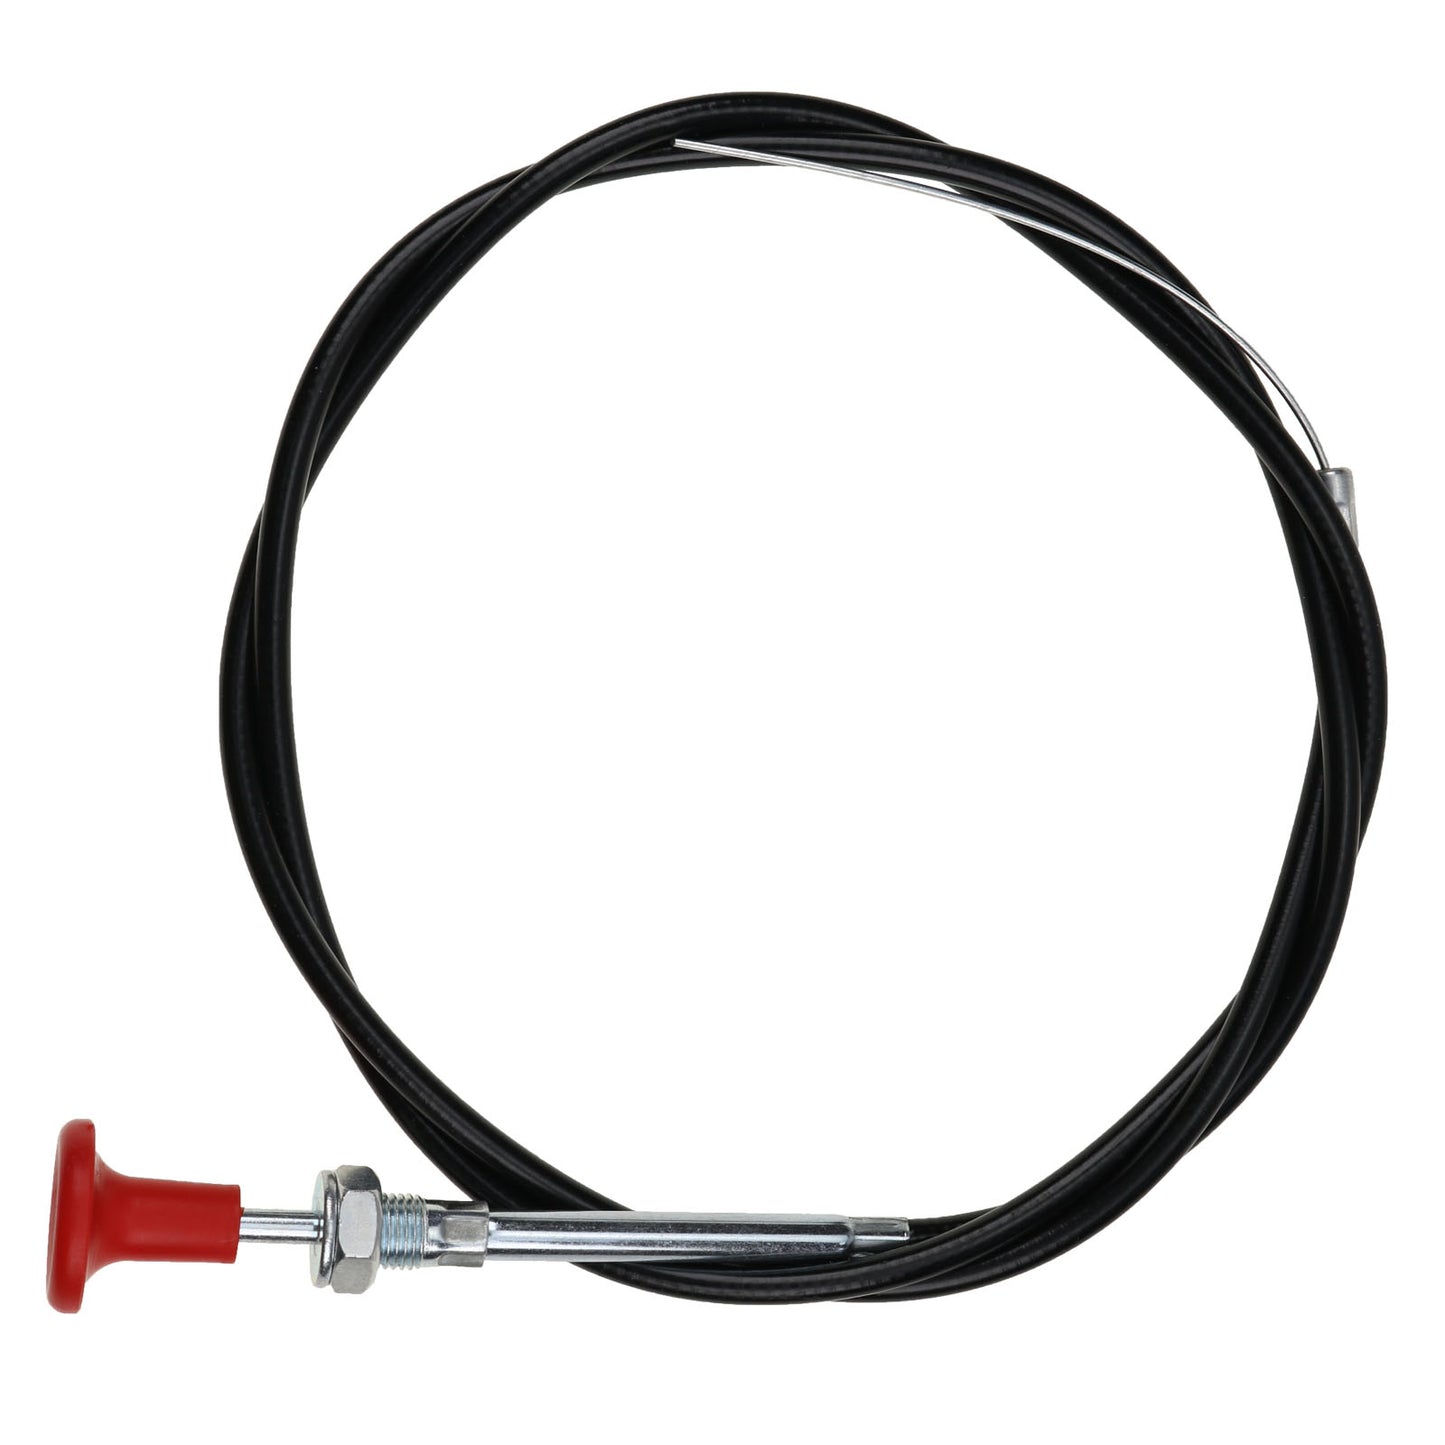 New Fuel Stop Fuel Shut Off Cable E5NN9C331EA Compatible with Ford 233 333 2000 2600 3000 3600 3900 4000 4100 4600 4610 5000 5600 5610 6600 6610 7000 7600 7610 7710 335 515